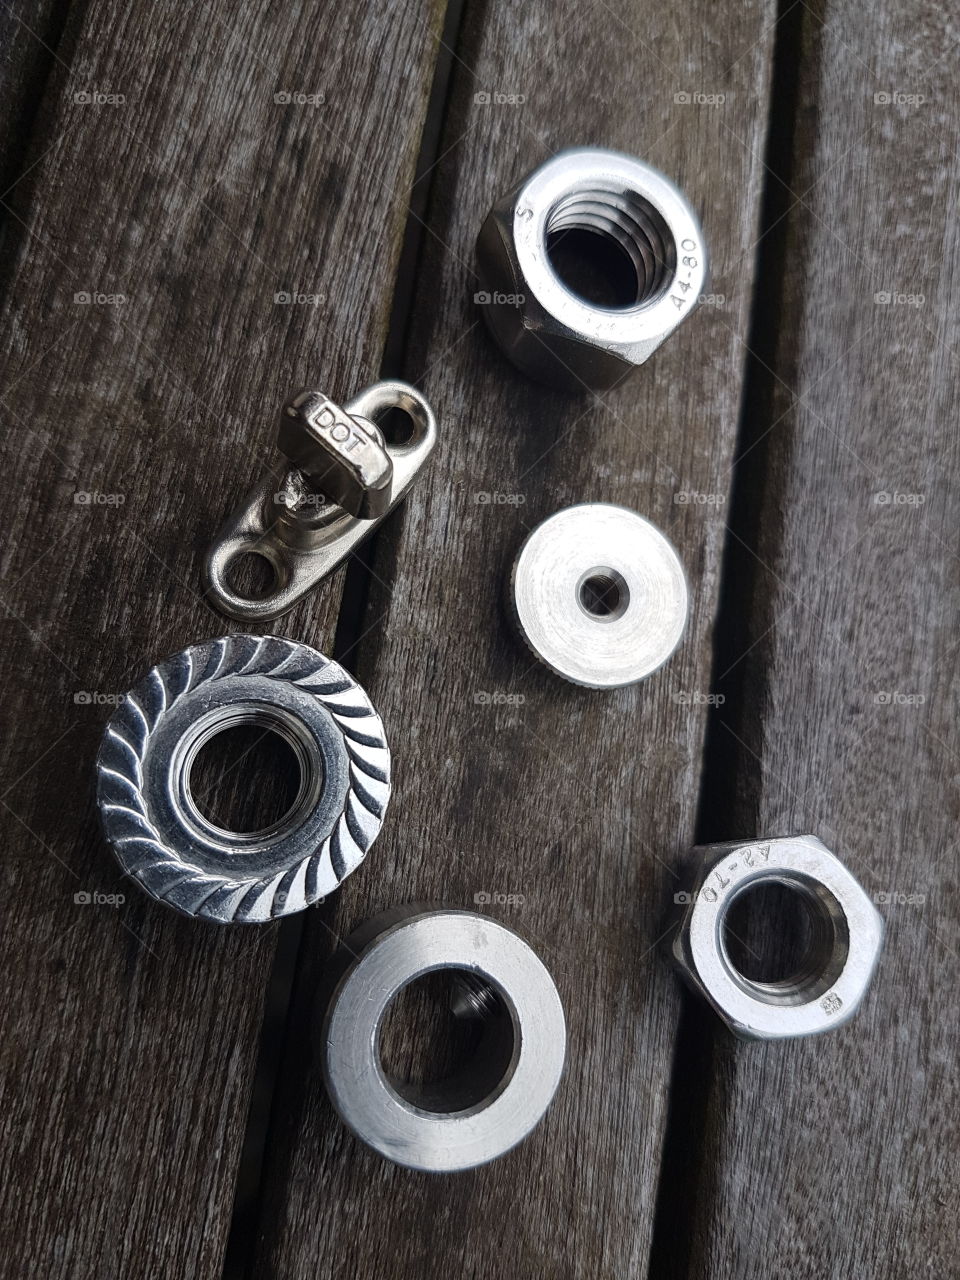 stainless steel fasteners & nuts